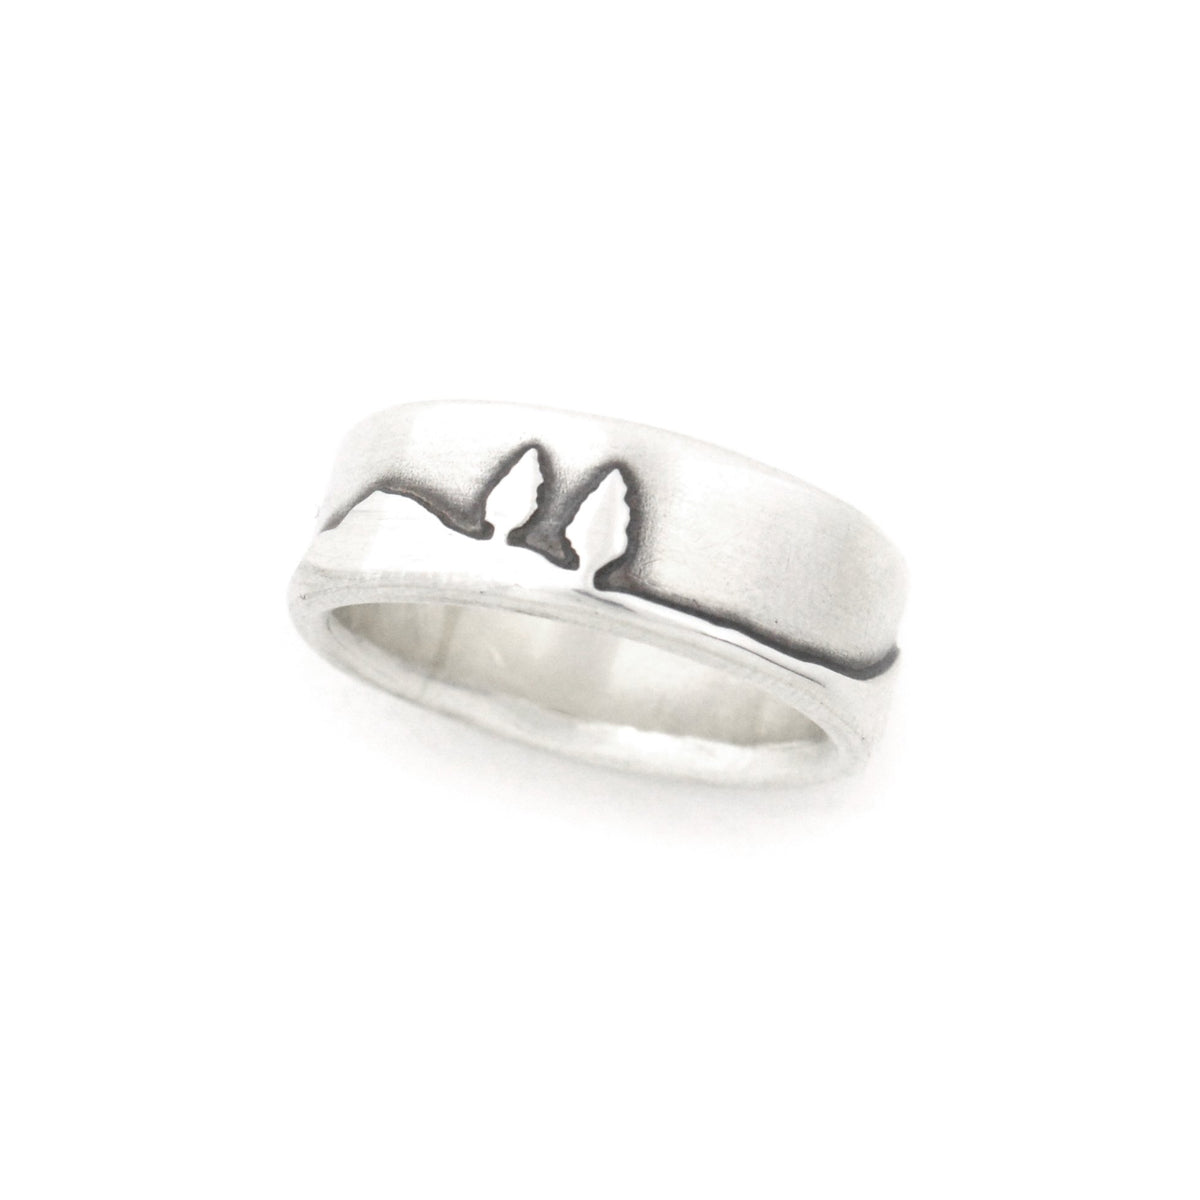 Silver Shoreline Ring - Wedding Ring 6mm / Select Size 6mm / 4 2762 - handmade by Beth Millner Jewelry